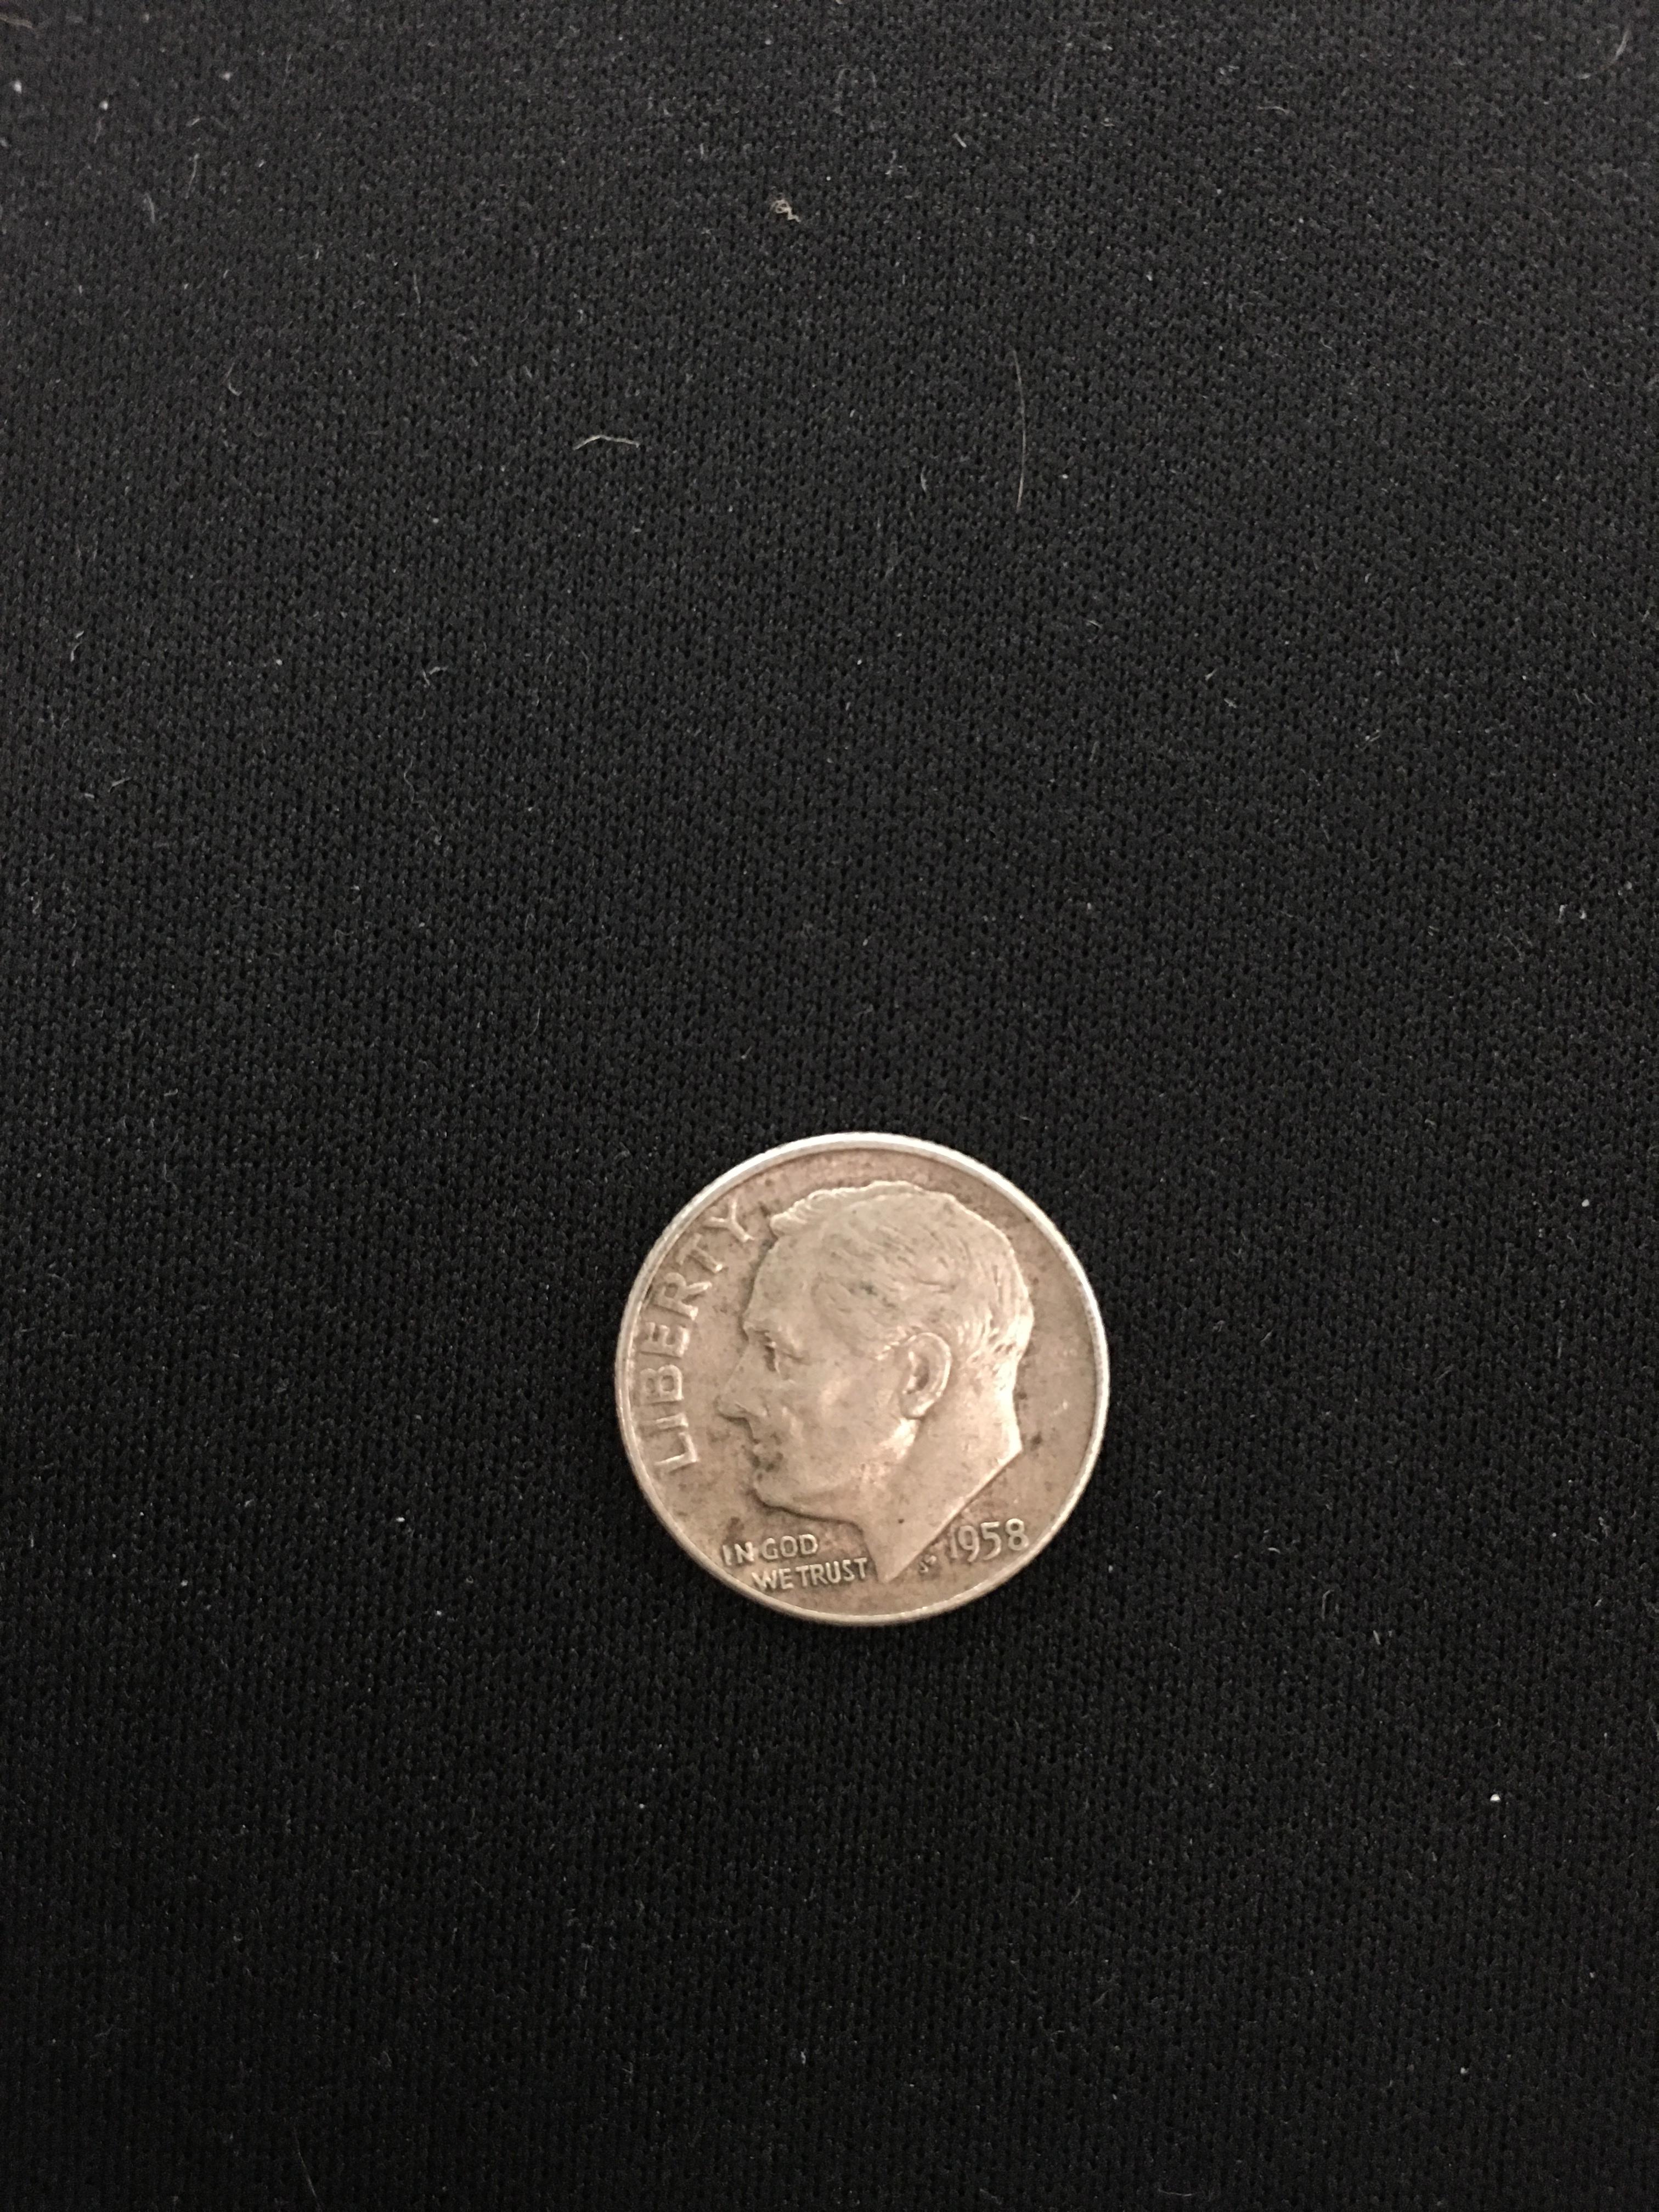 1958-D United States Roosevelt Dime - 90% Silver Coin